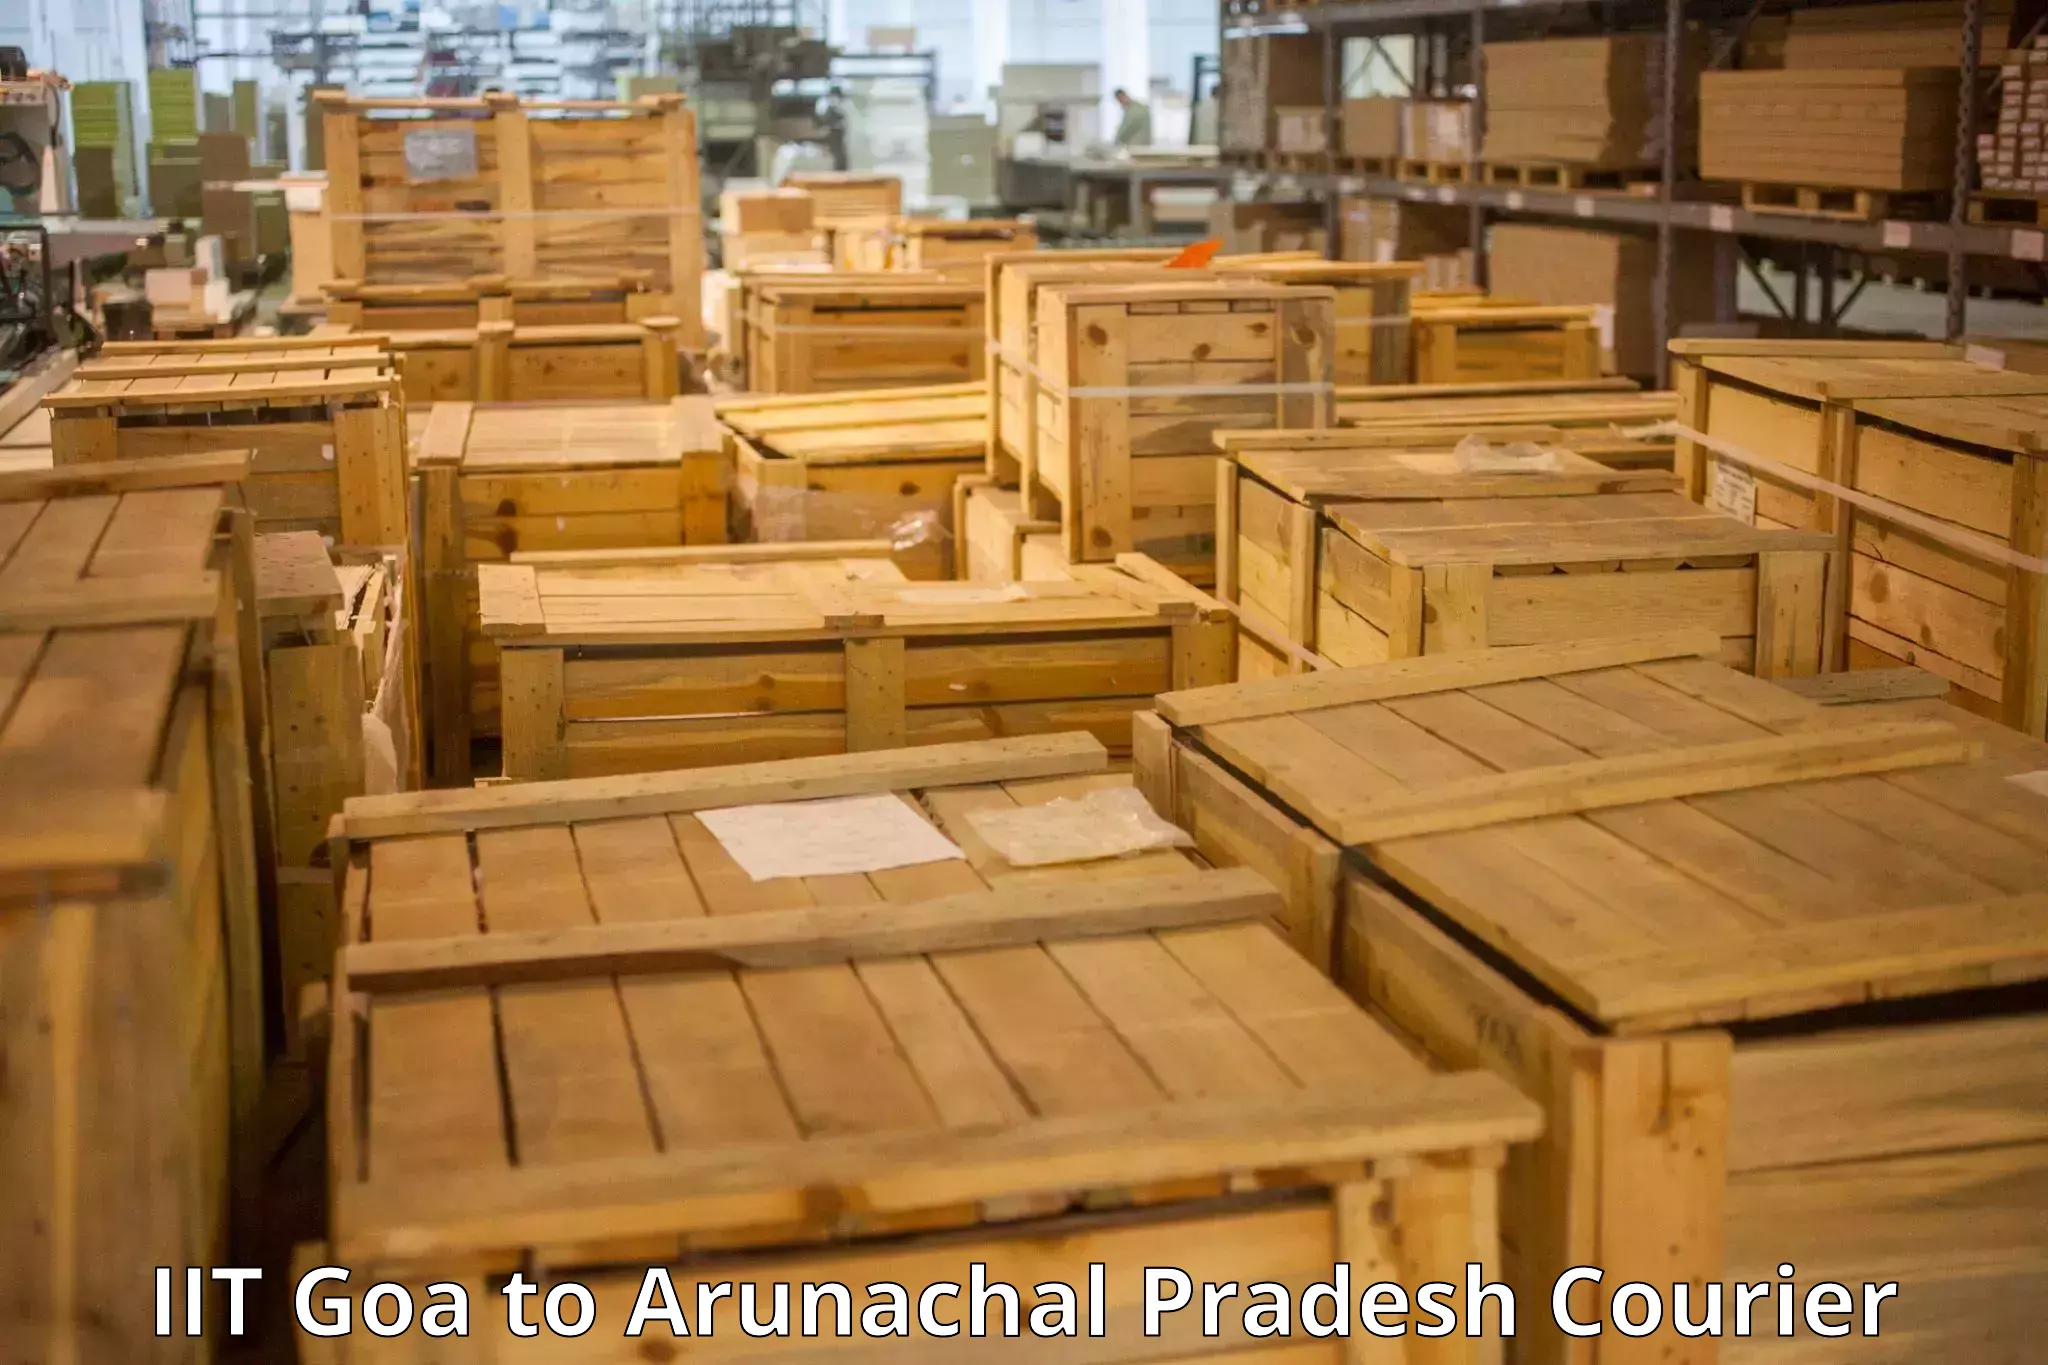 Luggage shipment tracking in IIT Goa to Lower Dibang Valley